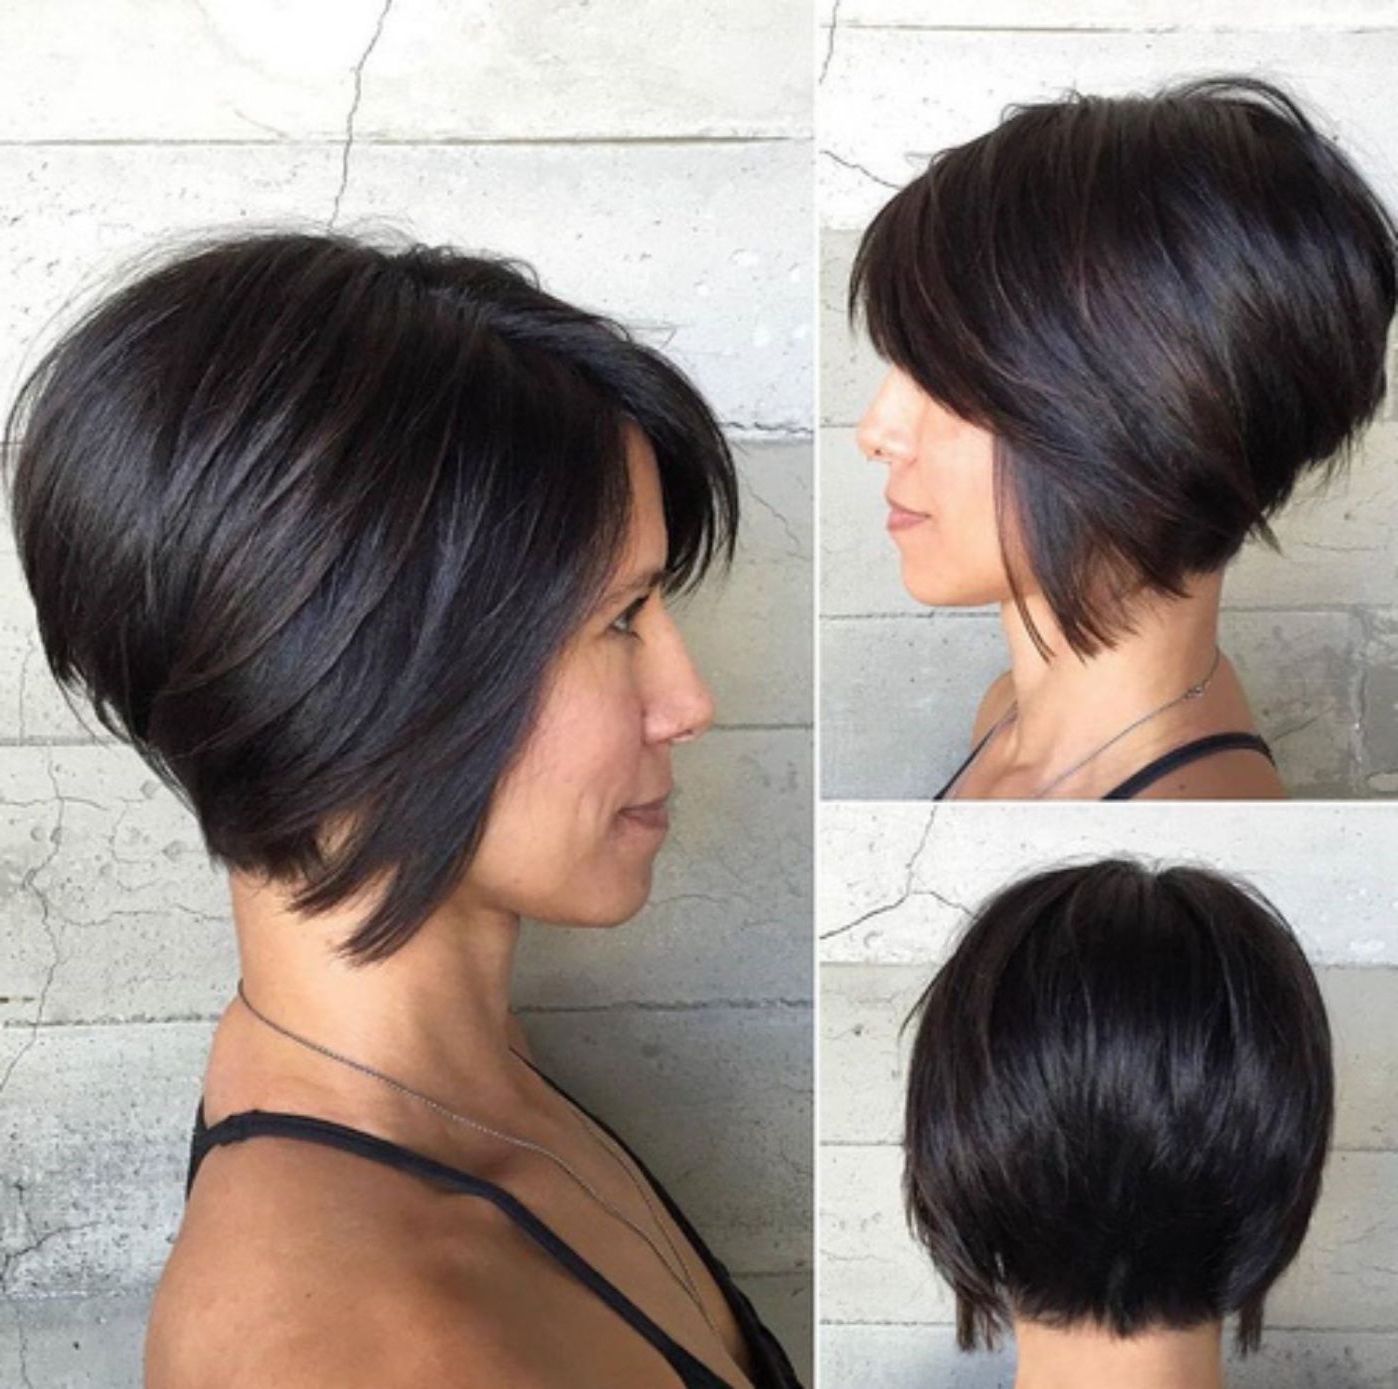 60 Classy Short Haircuts And Hairstyles For Thick Hair In 2018 For Black Curly Inverted Bob Hairstyles For Thick Hair (View 11 of 20)